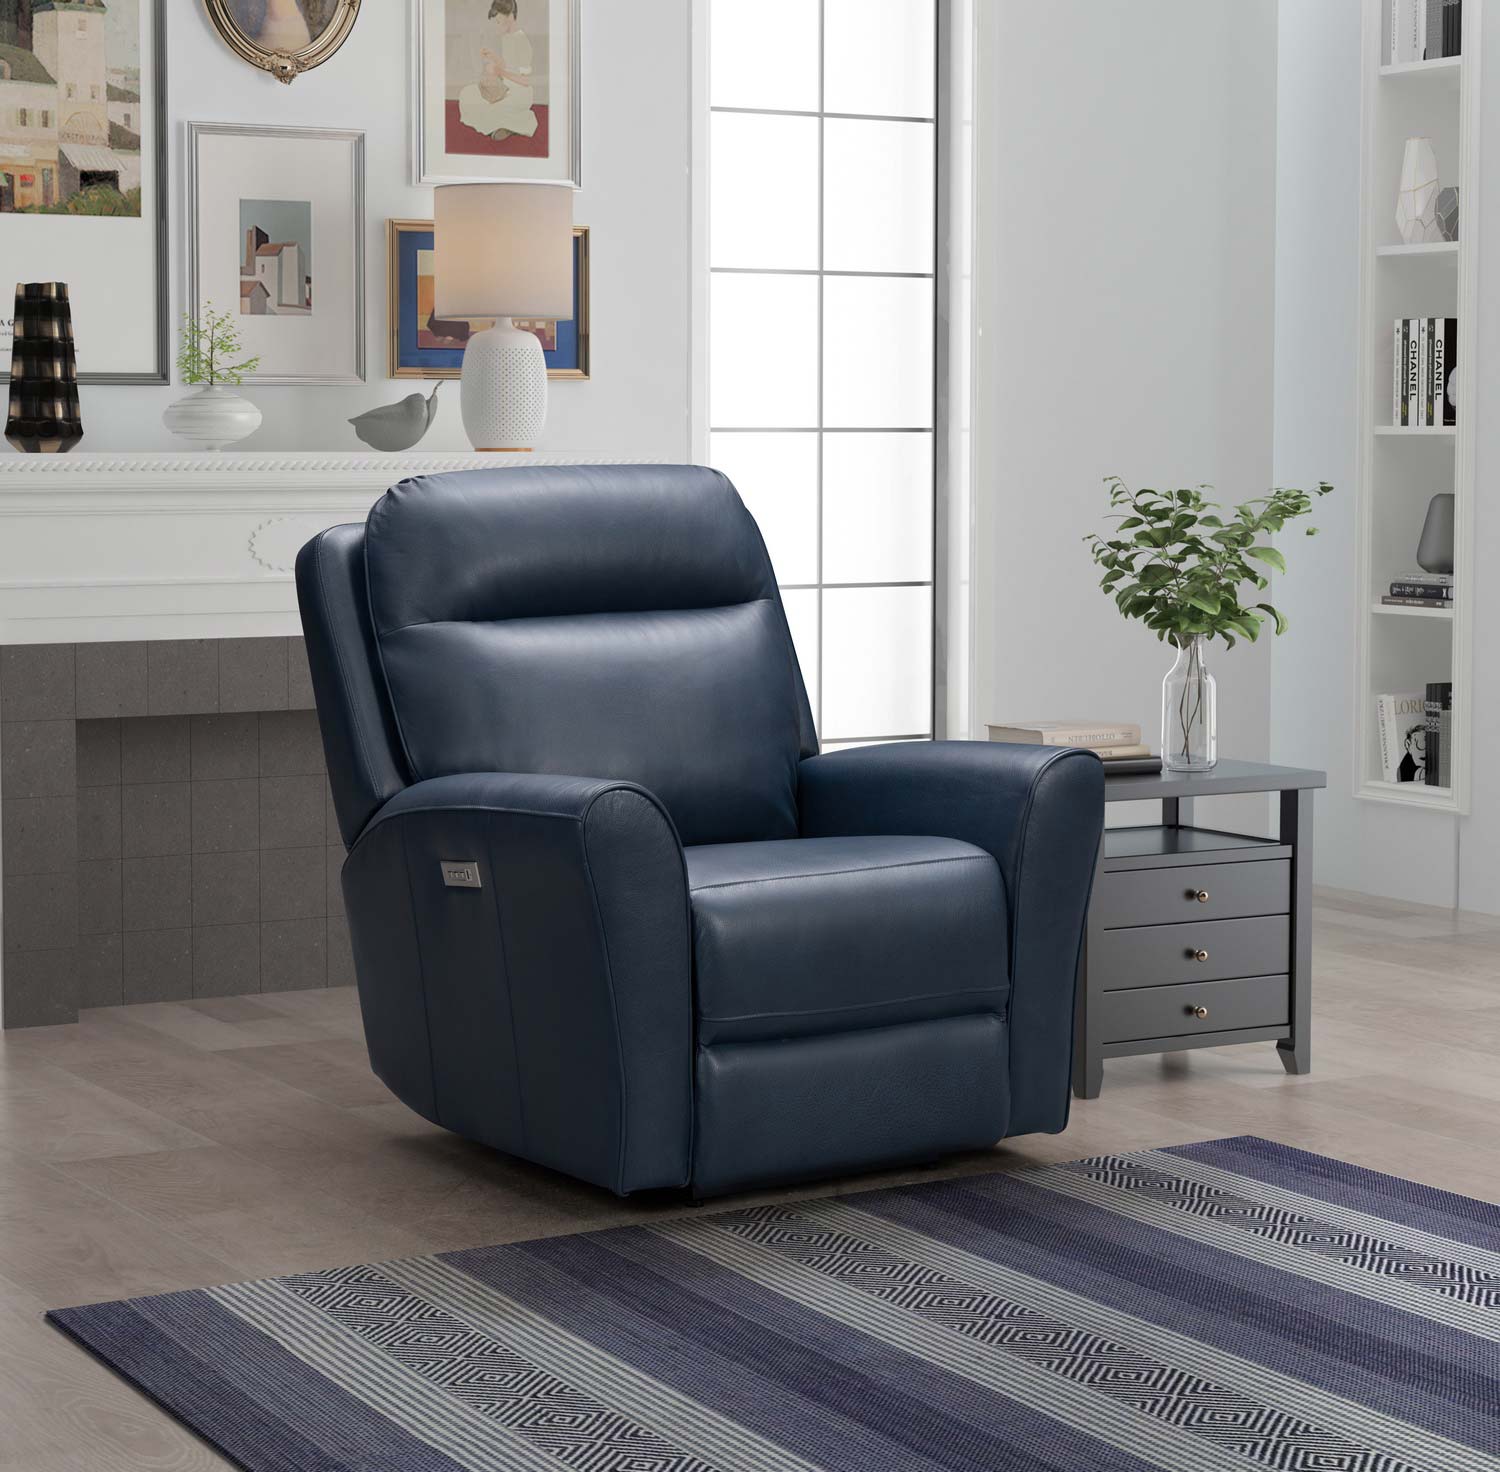 Barcalounger Kelsey Big and Tall Power Recliner Chair with Power Head Rest and Lumbar - Marco Navy Blue/Leather Match